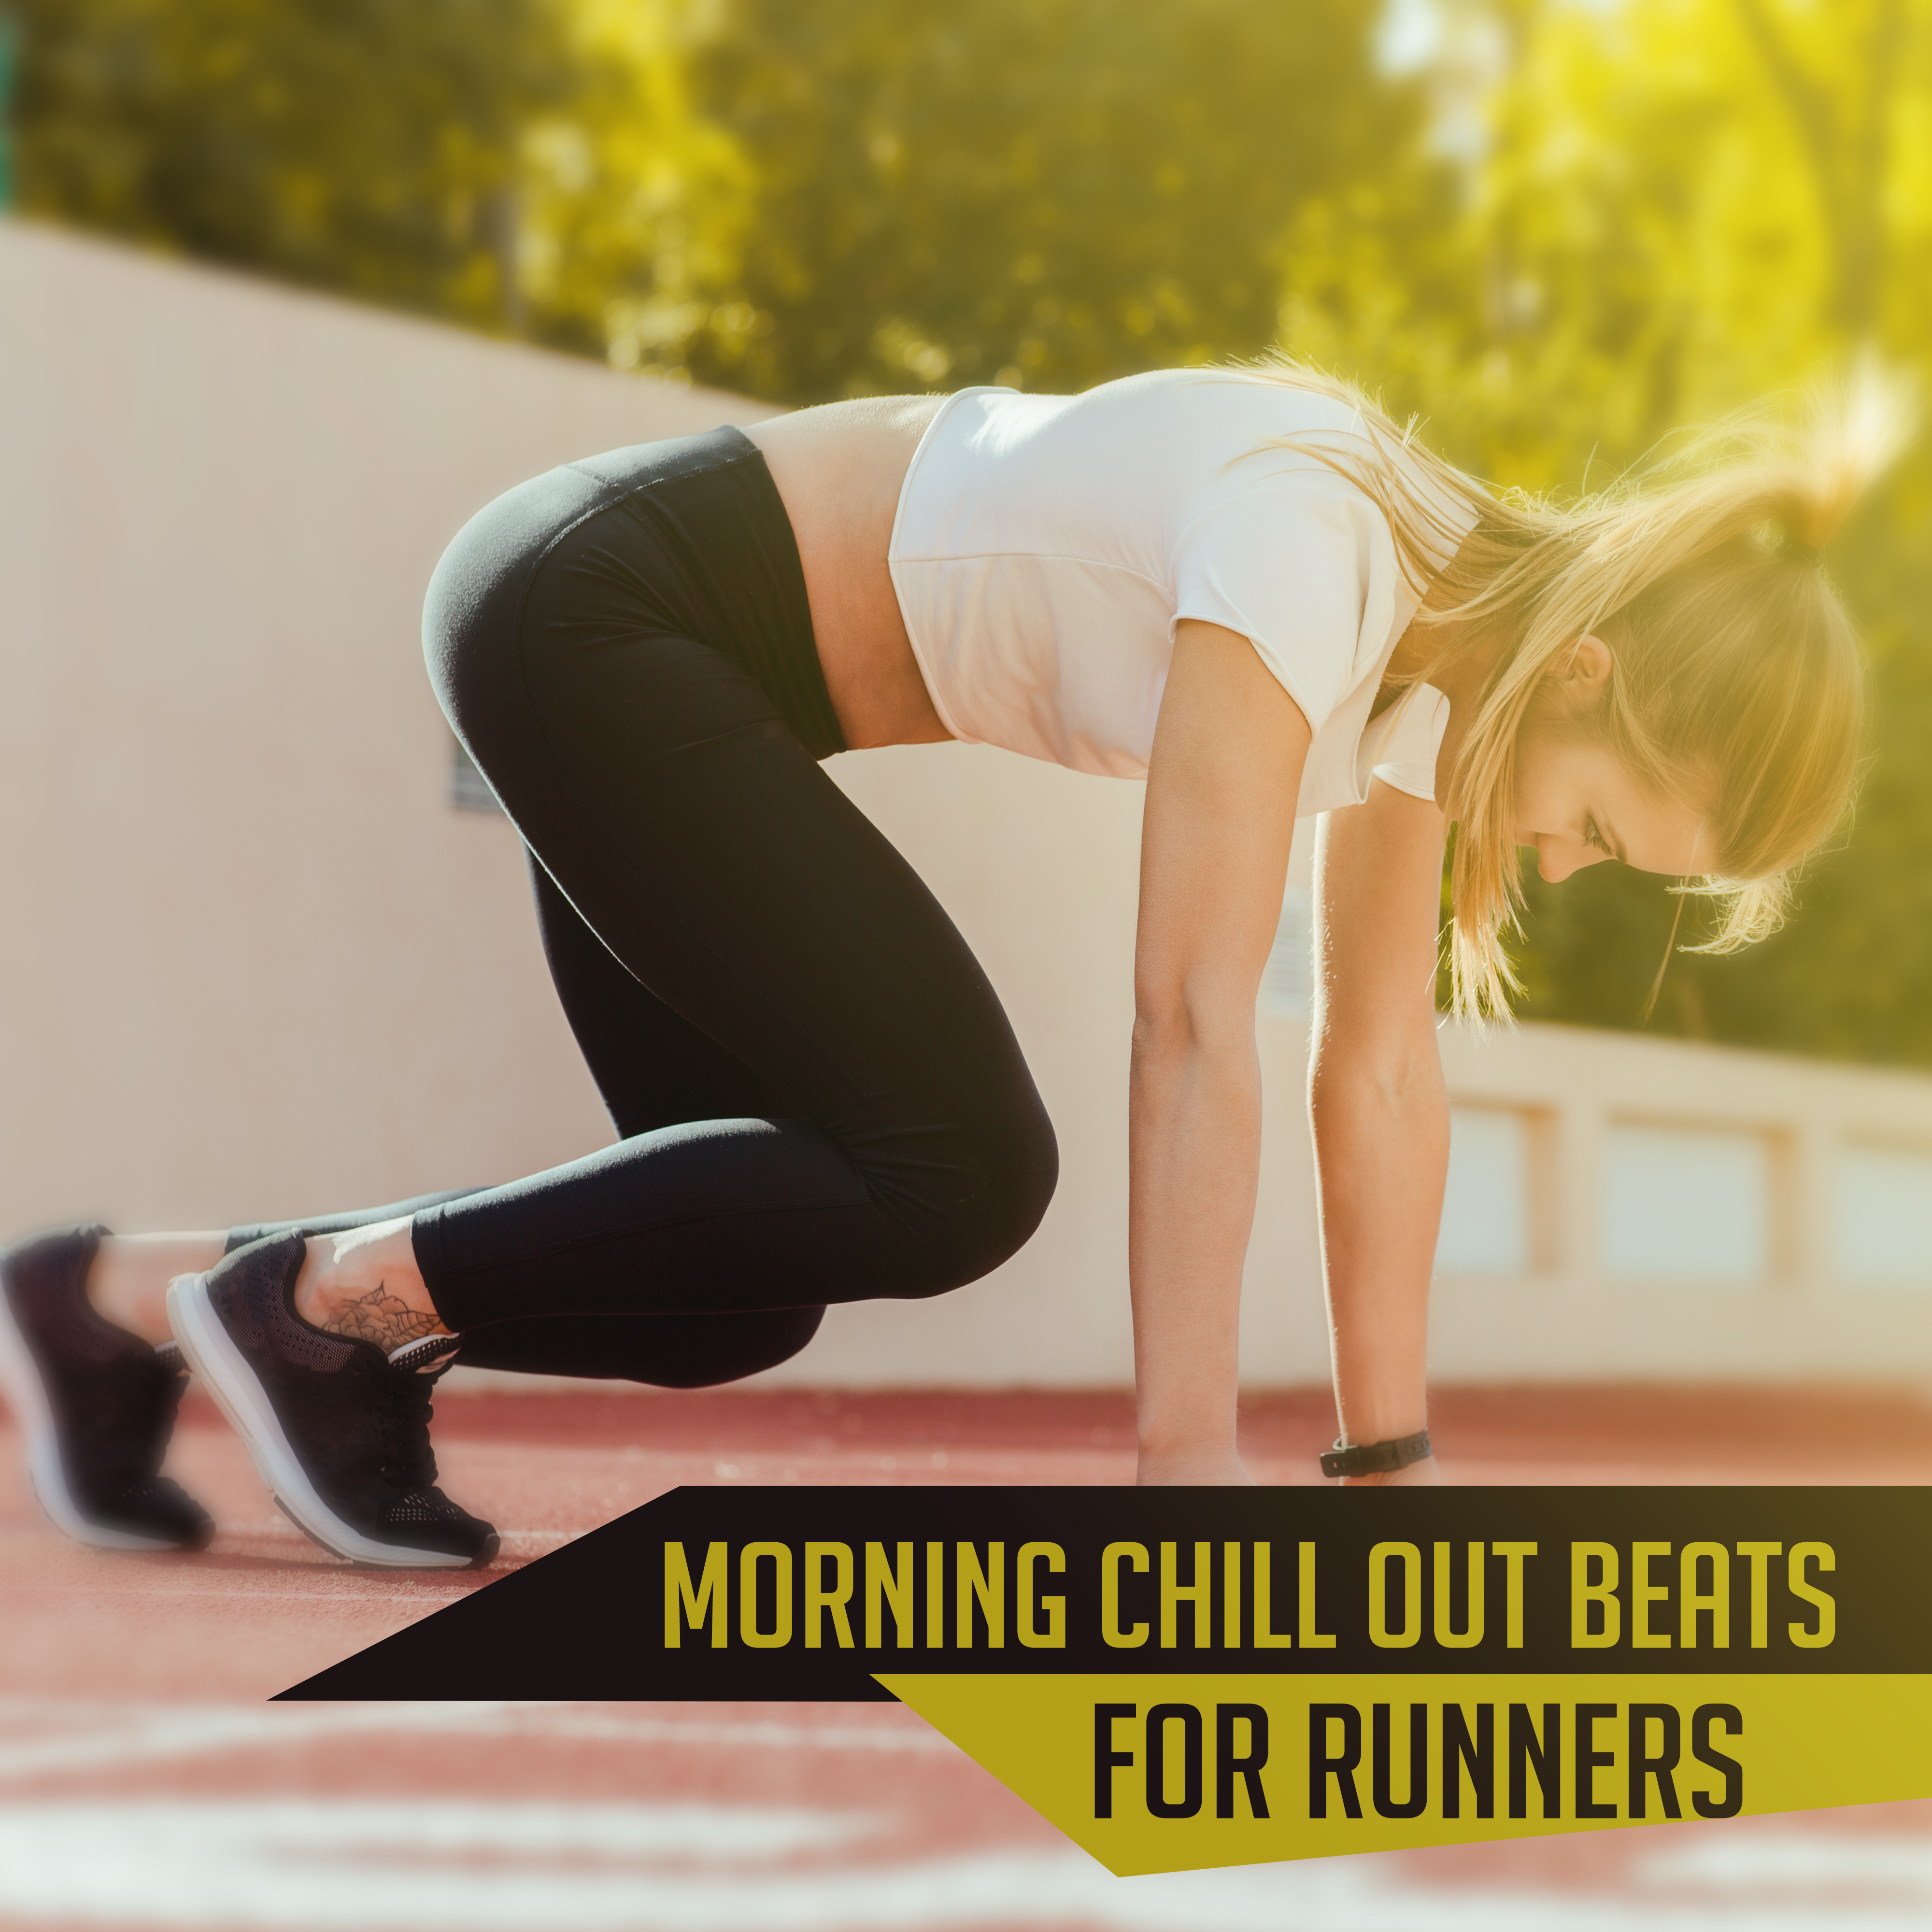 Morning Chill Out Beats for Runners – Summer Morning, Chill Out Running Hits, Easy Listening